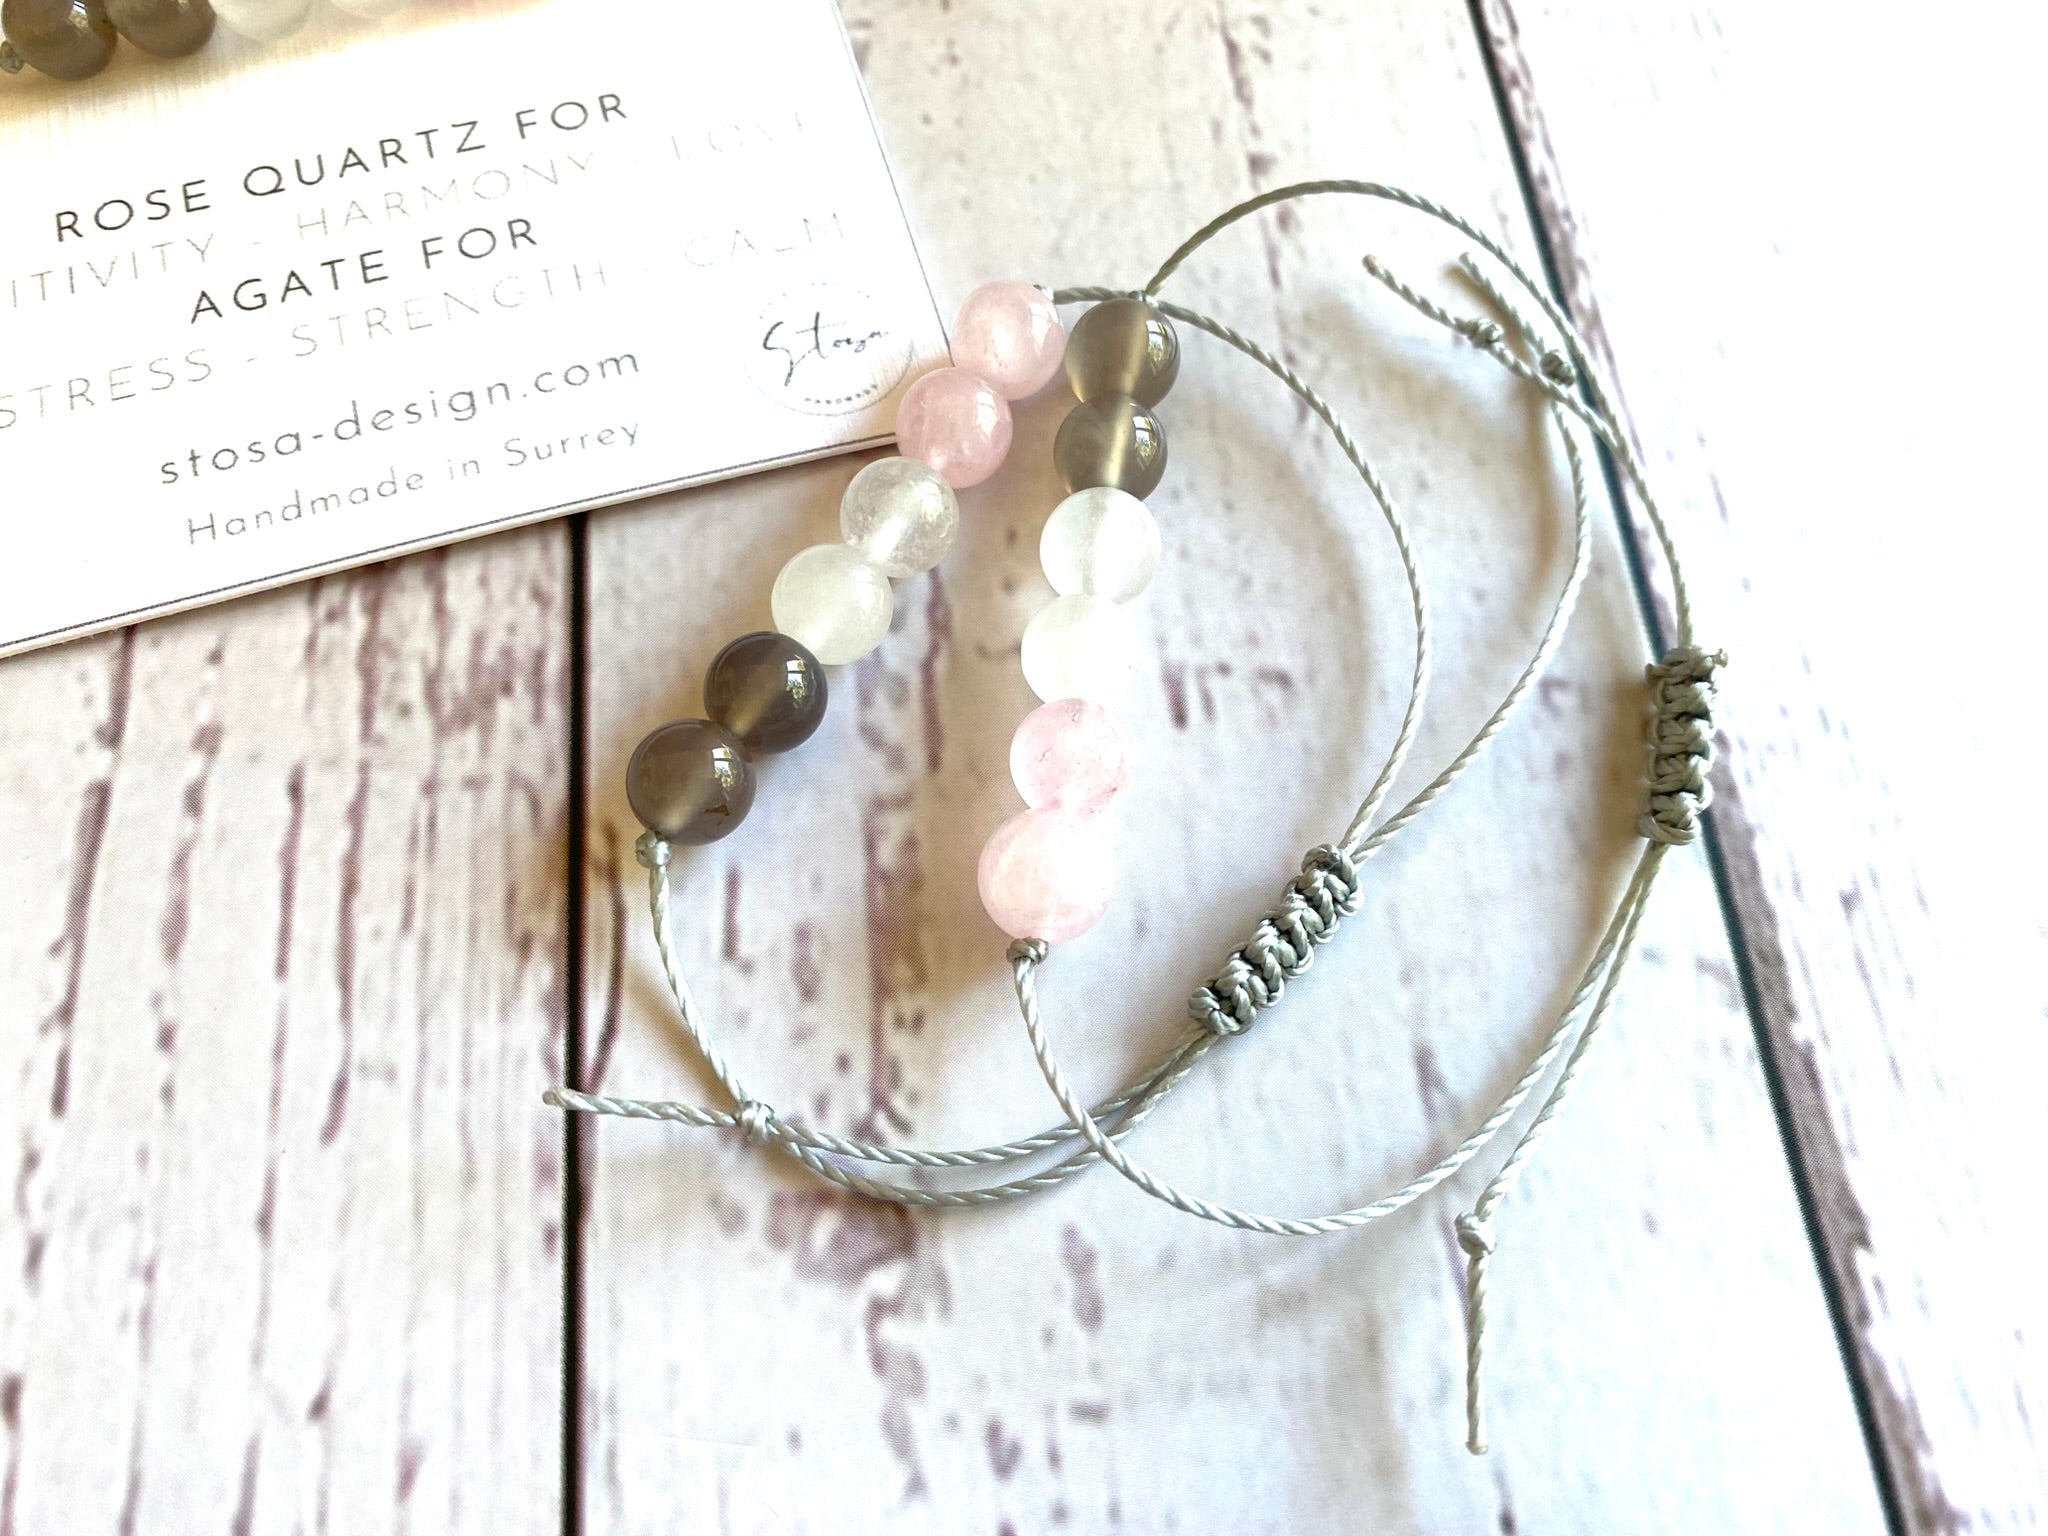 Anxiety Relief Crystal Bracelet with Rose Quartz and Agate – Stosa Design